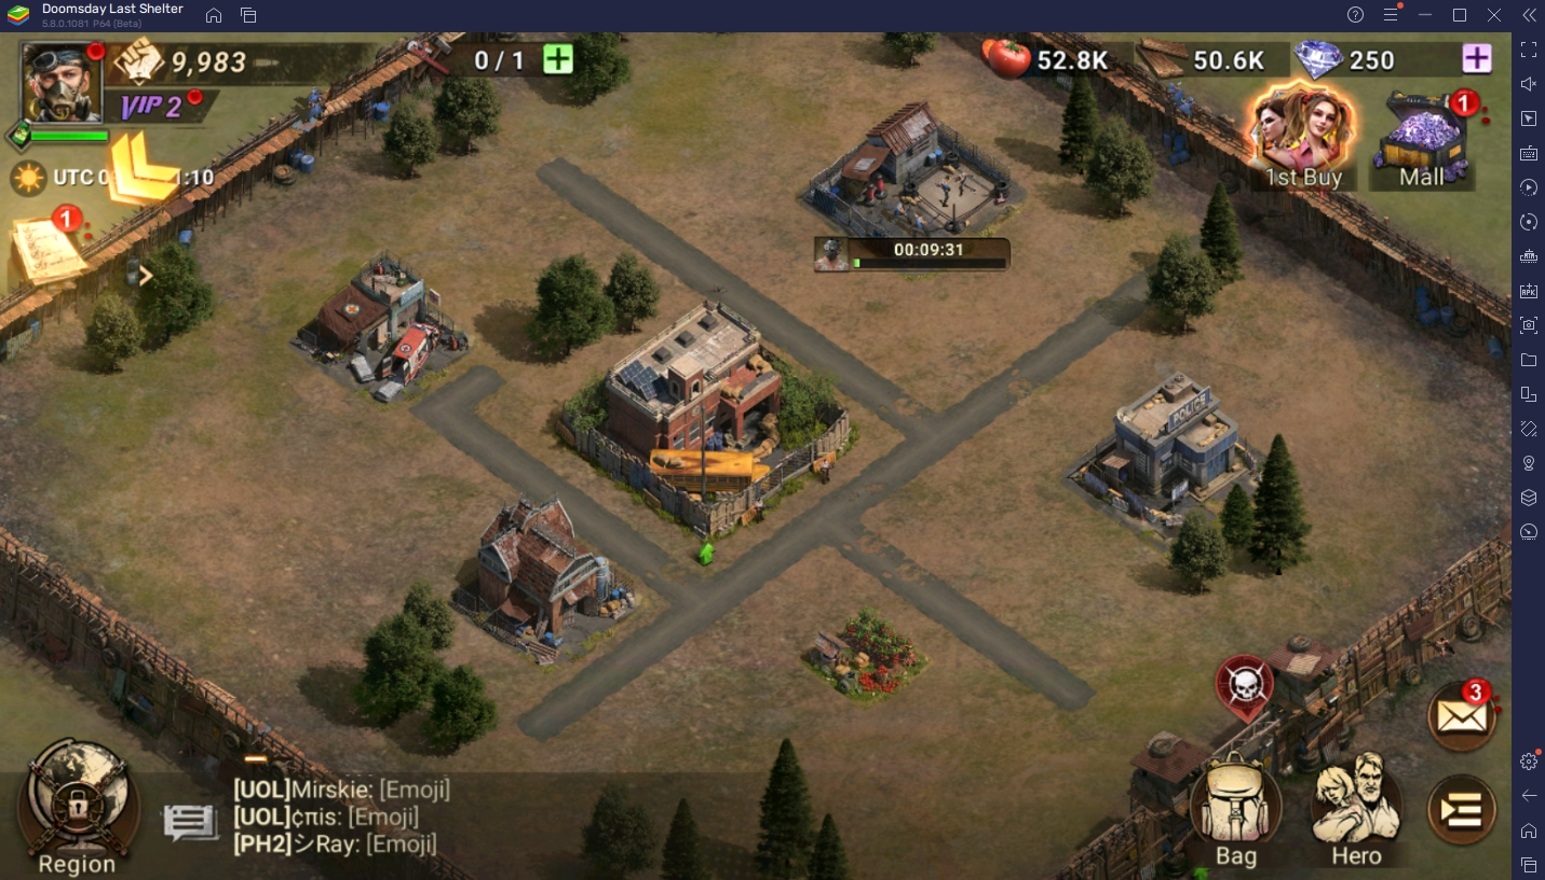 BlueStacks' Beginners Guide to Playing Doomsday: Last Survivors